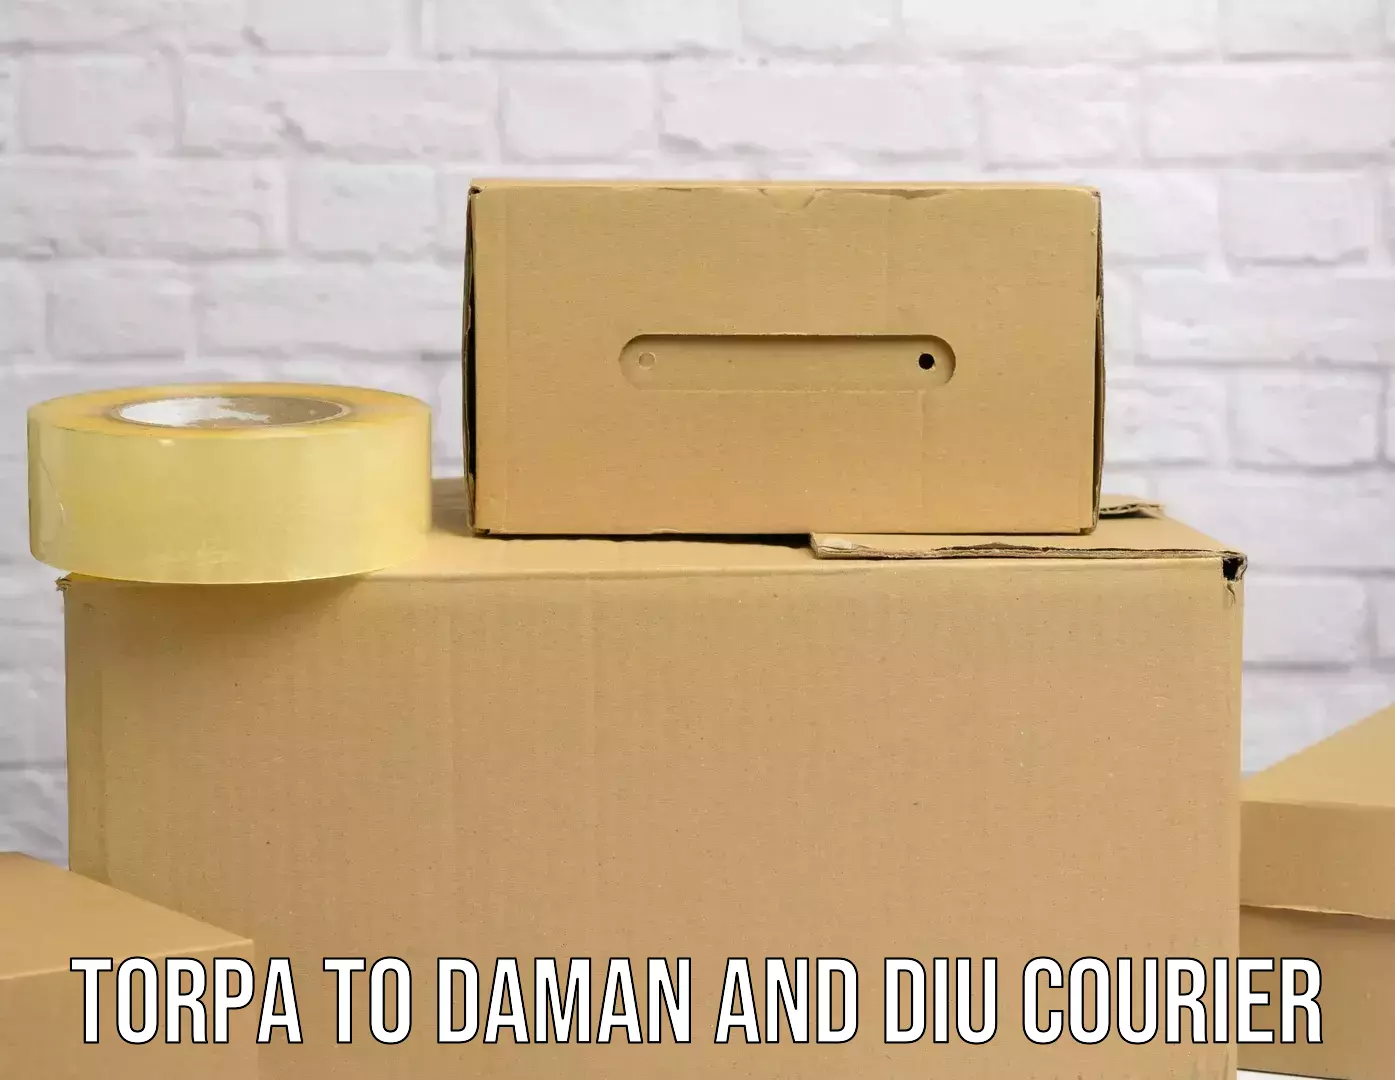 Seamless shipping experience Torpa to Daman and Diu